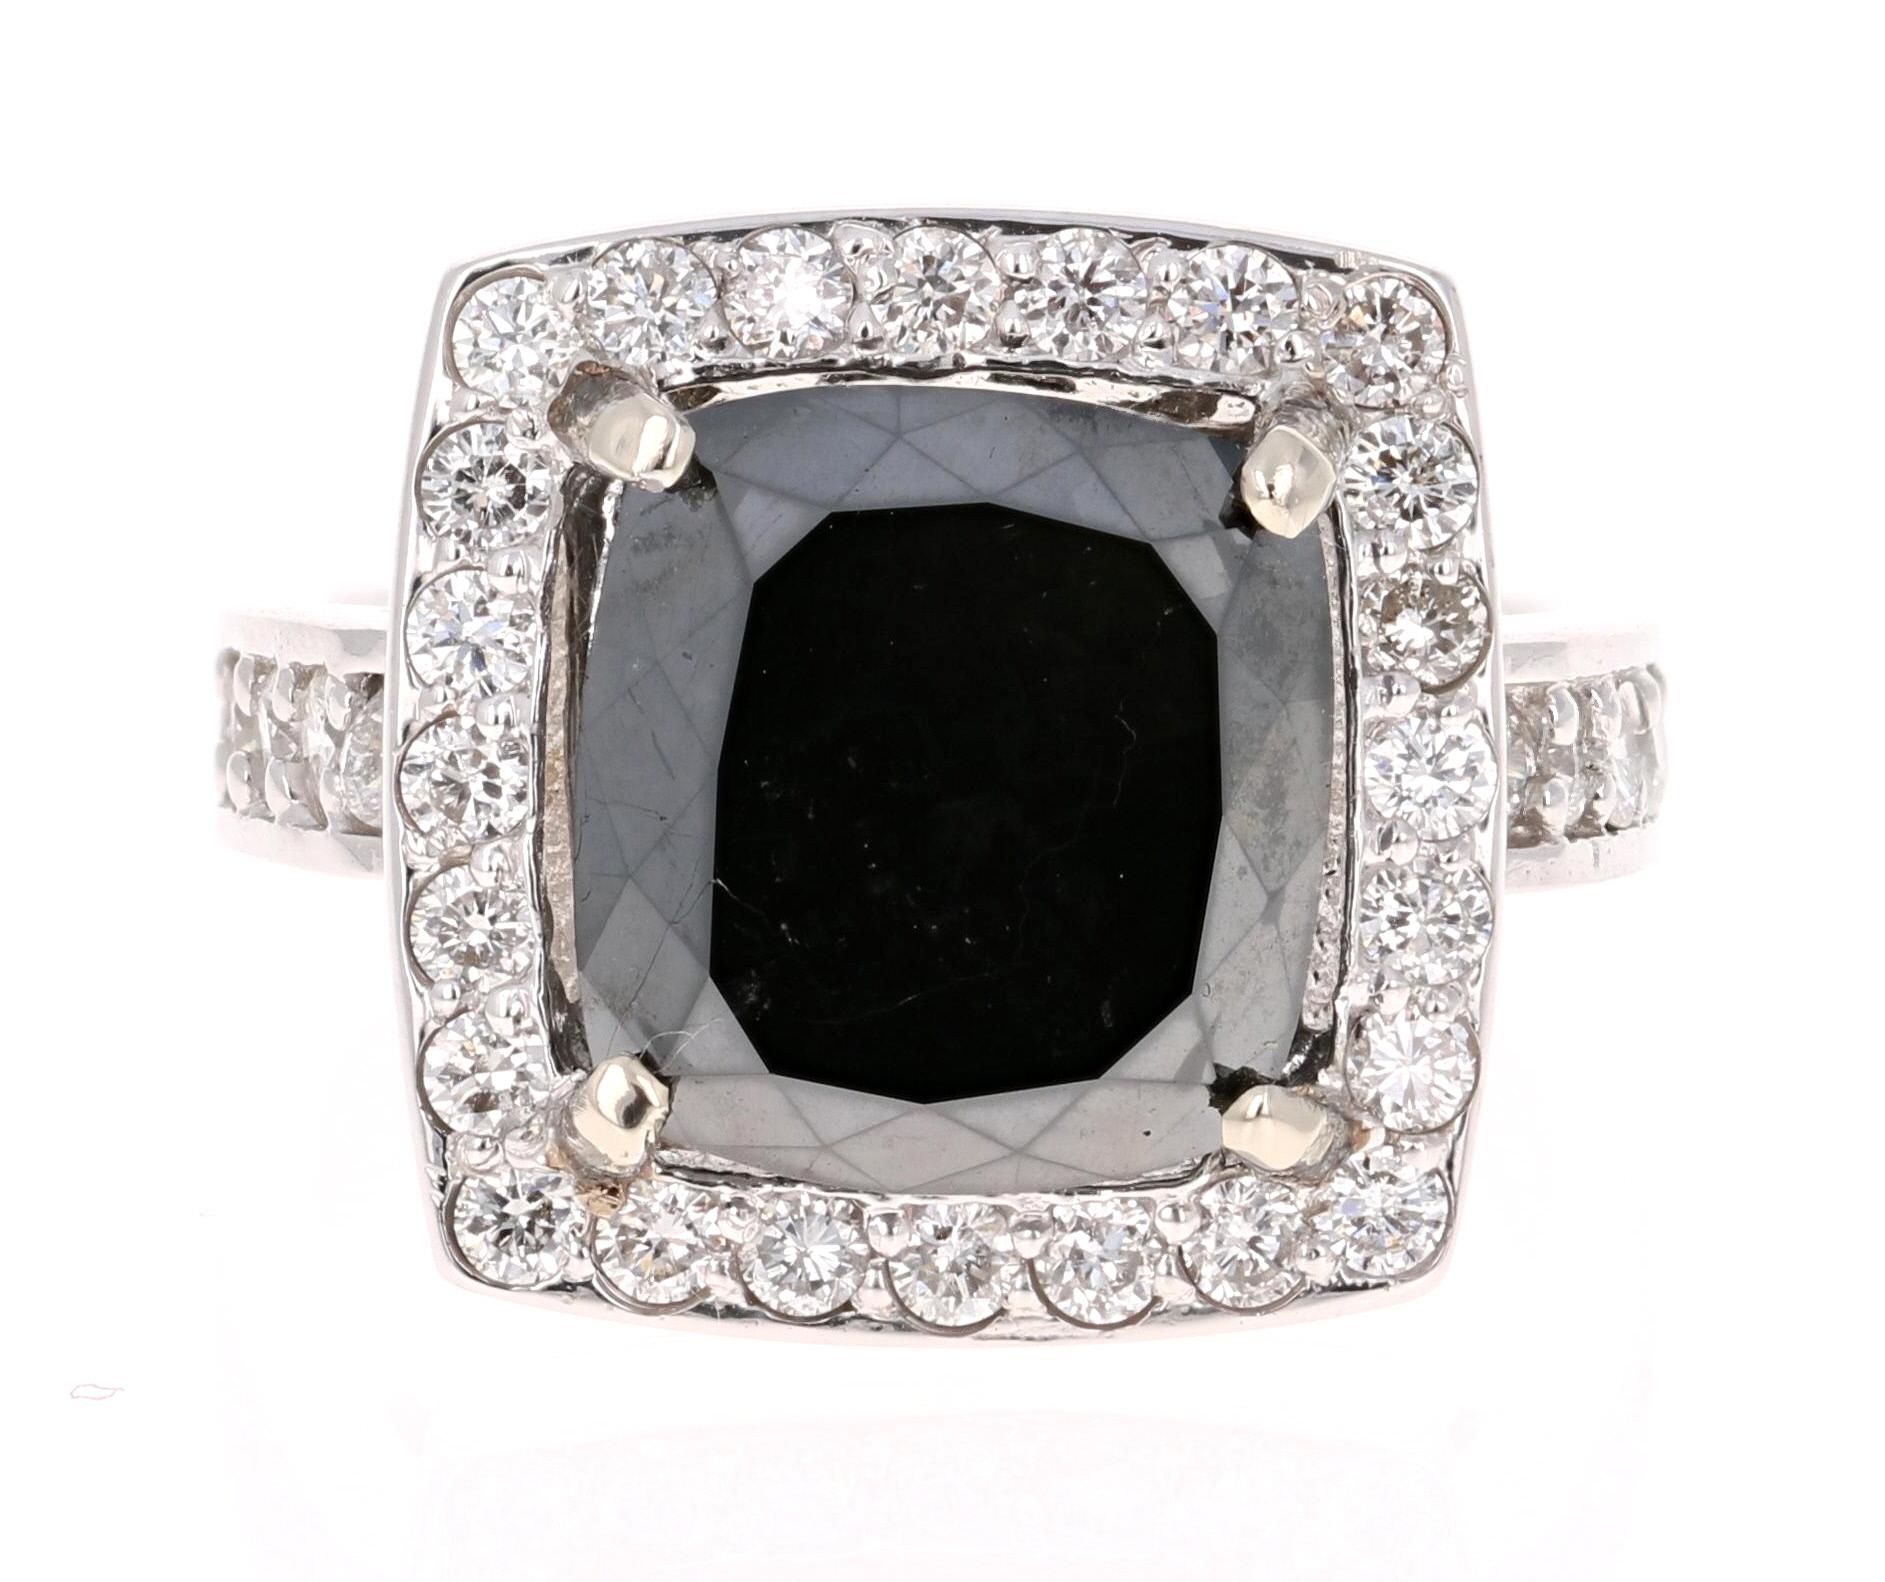 8.44 Carat Square Cut Black Diamond White Gold Engagement Ring!

Huge Square Cut Black Diamond Ring! This ring has a 7.54 Carat Square Cut Black Diamond. The Black Diamond is a natural diamond that is color-treated to enhance the color and is